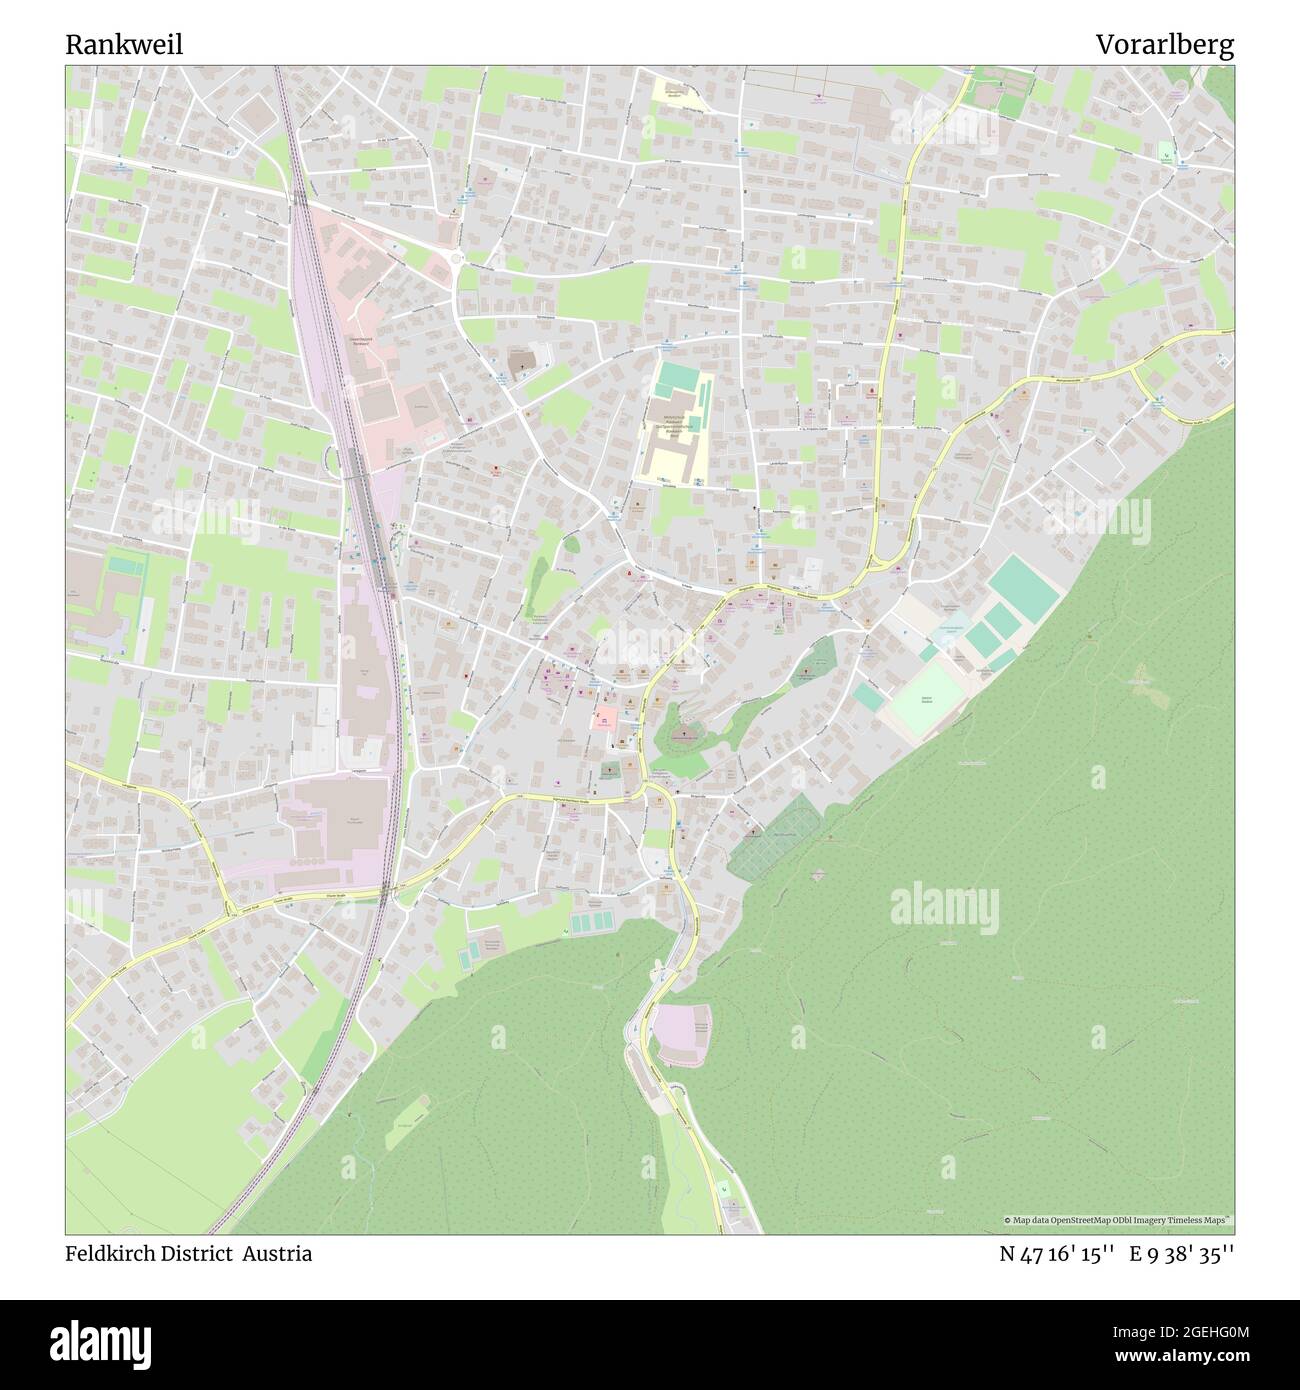 Rankweil, Feldkirch District, Austria, Vorarlberg, N 47 16' 15'', E 9 38' 35'', map, Timeless Map published in 2021. Travelers, explorers and adventurers like Florence Nightingale, David Livingstone, Ernest Shackleton, Lewis and Clark and Sherlock Holmes relied on maps to plan travels to the world's most remote corners, Timeless Maps is mapping most locations on the globe, showing the achievement of great dreams Stock Photo